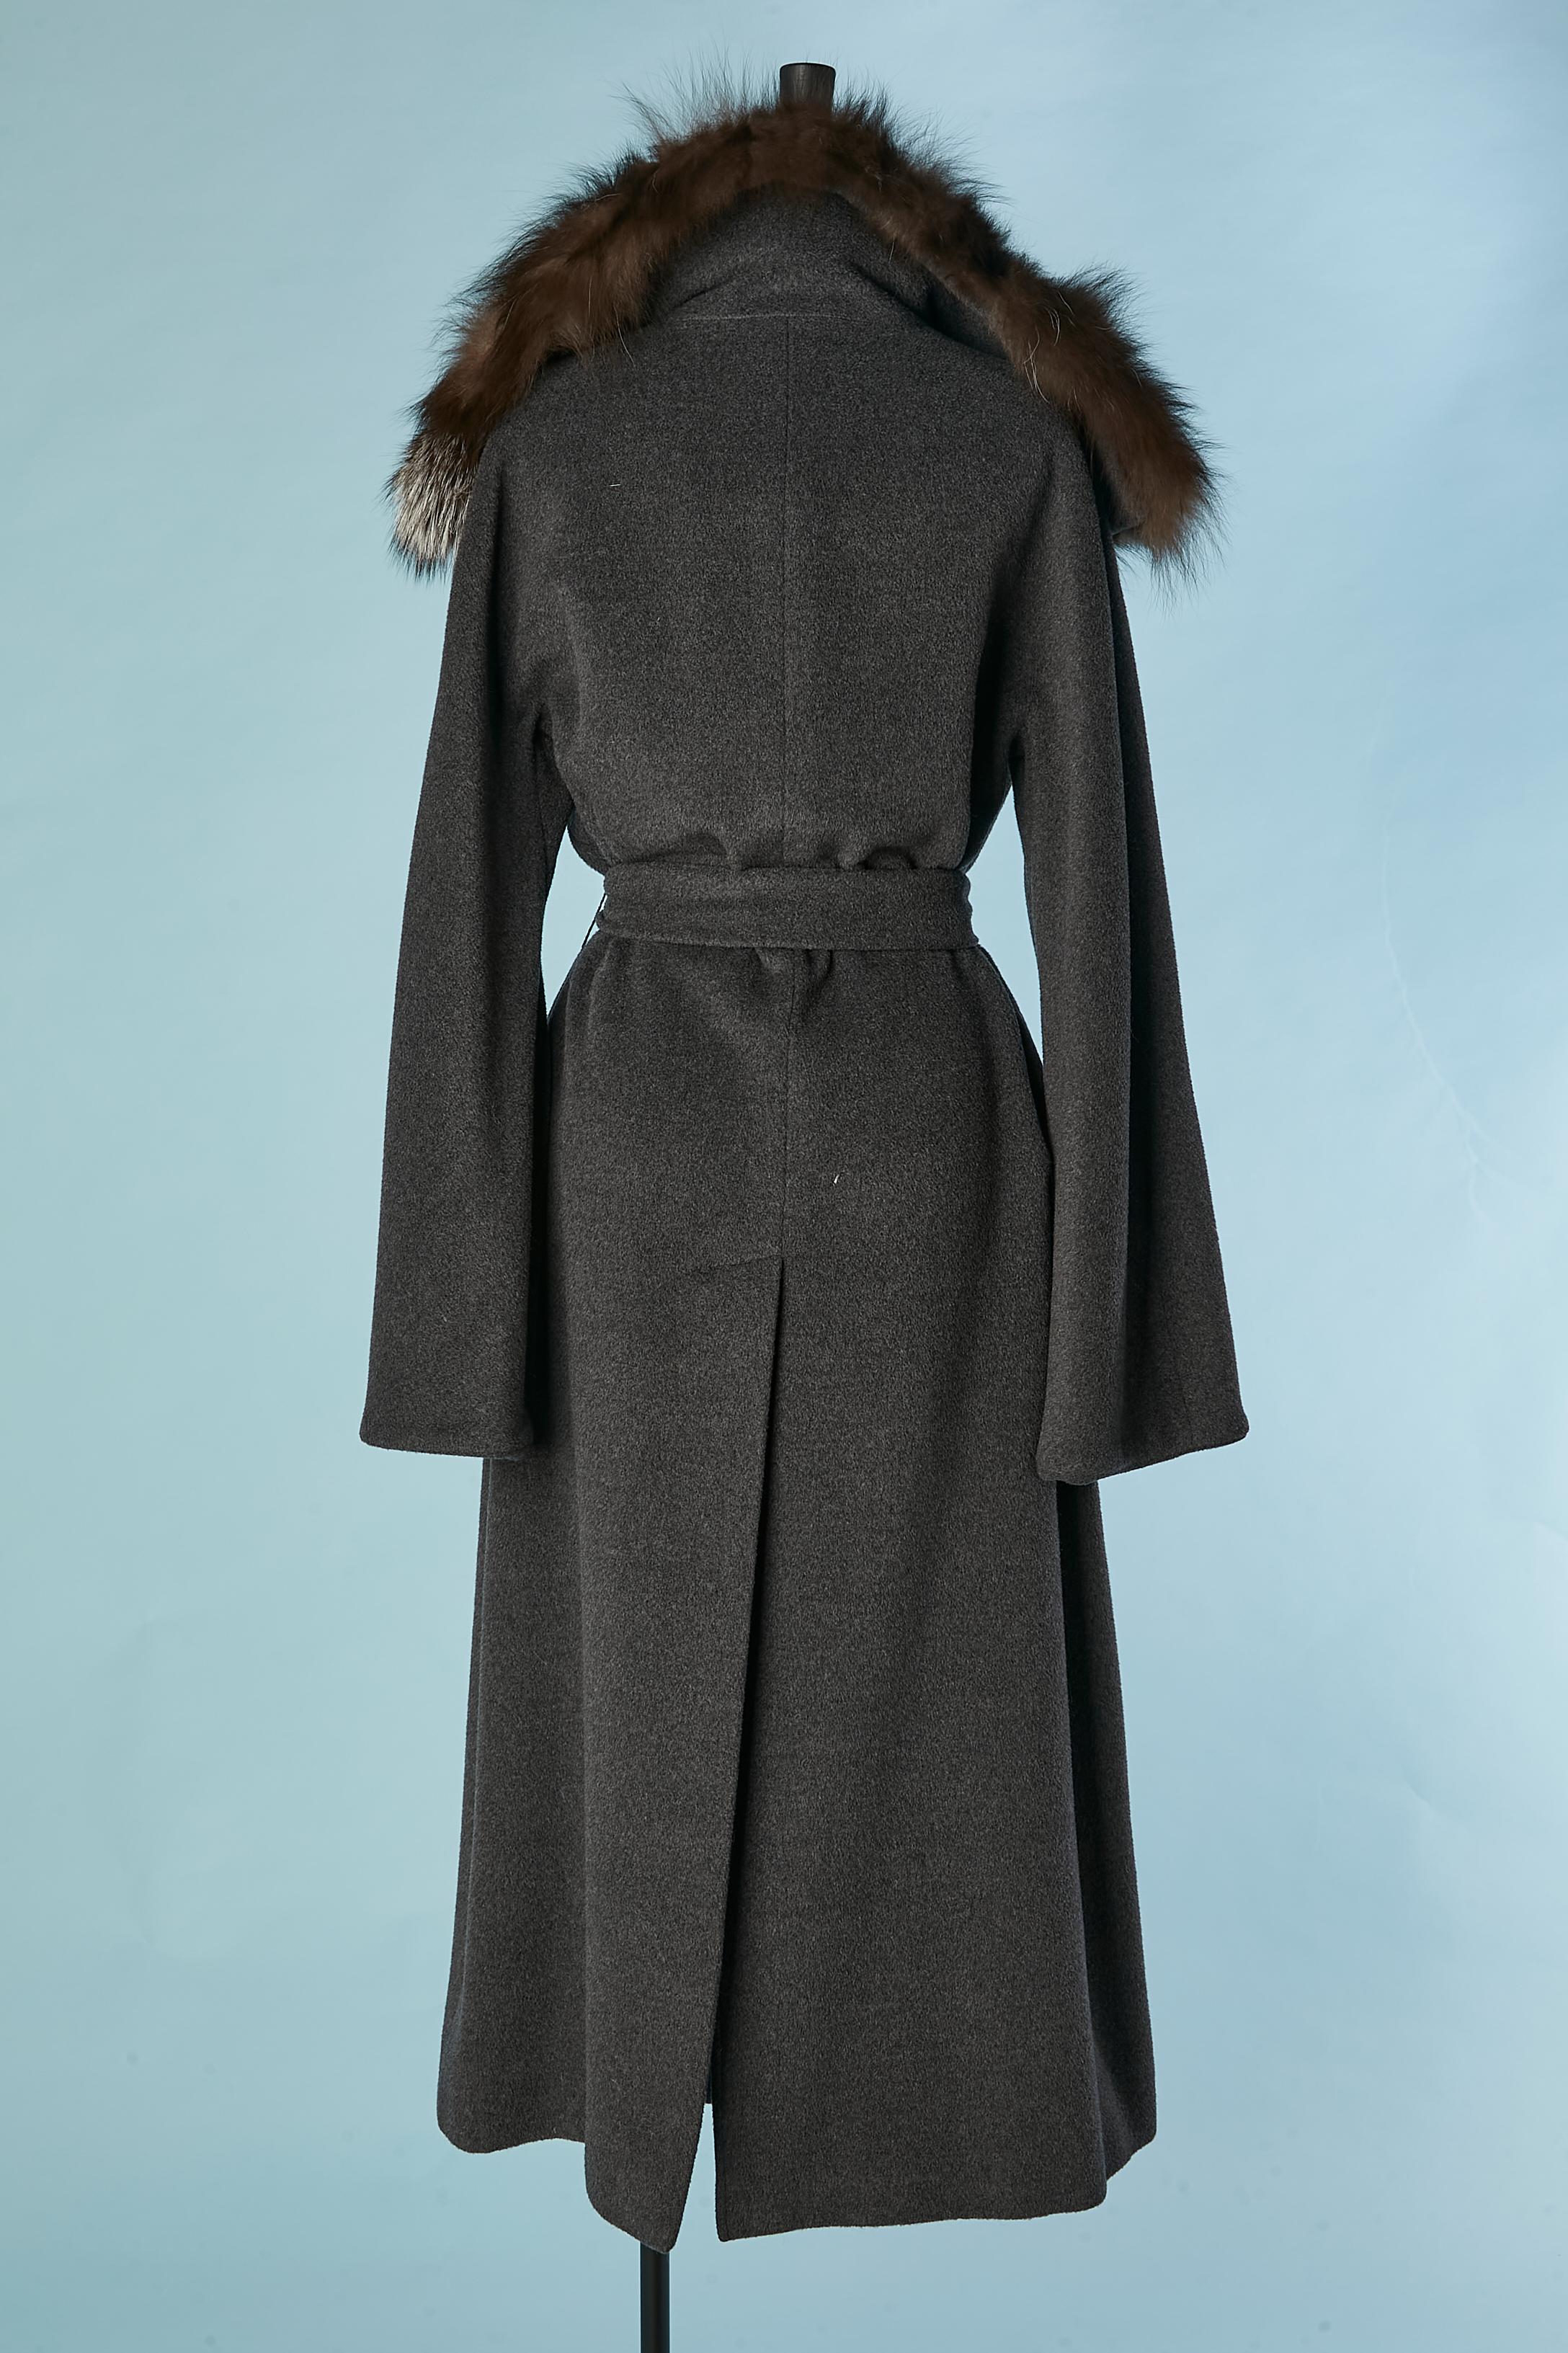 Grey single breasted wool coat with fur collar and belt CERRUTI 1881  For Sale 2